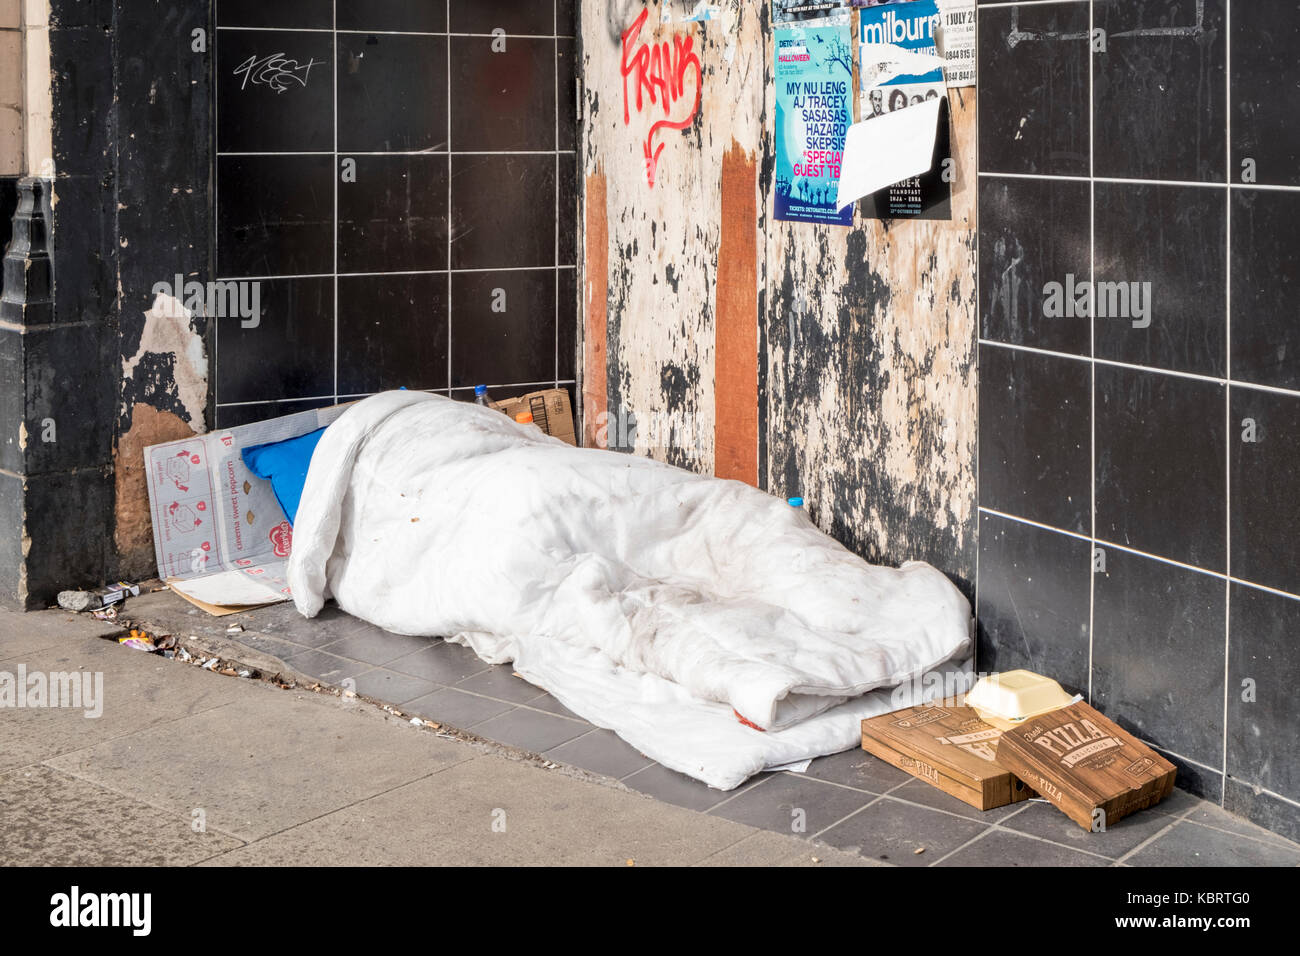 Rough sleeper. Homeless person sleeping rough in Sheffield, Yorkshire, England, UK Stock Photo